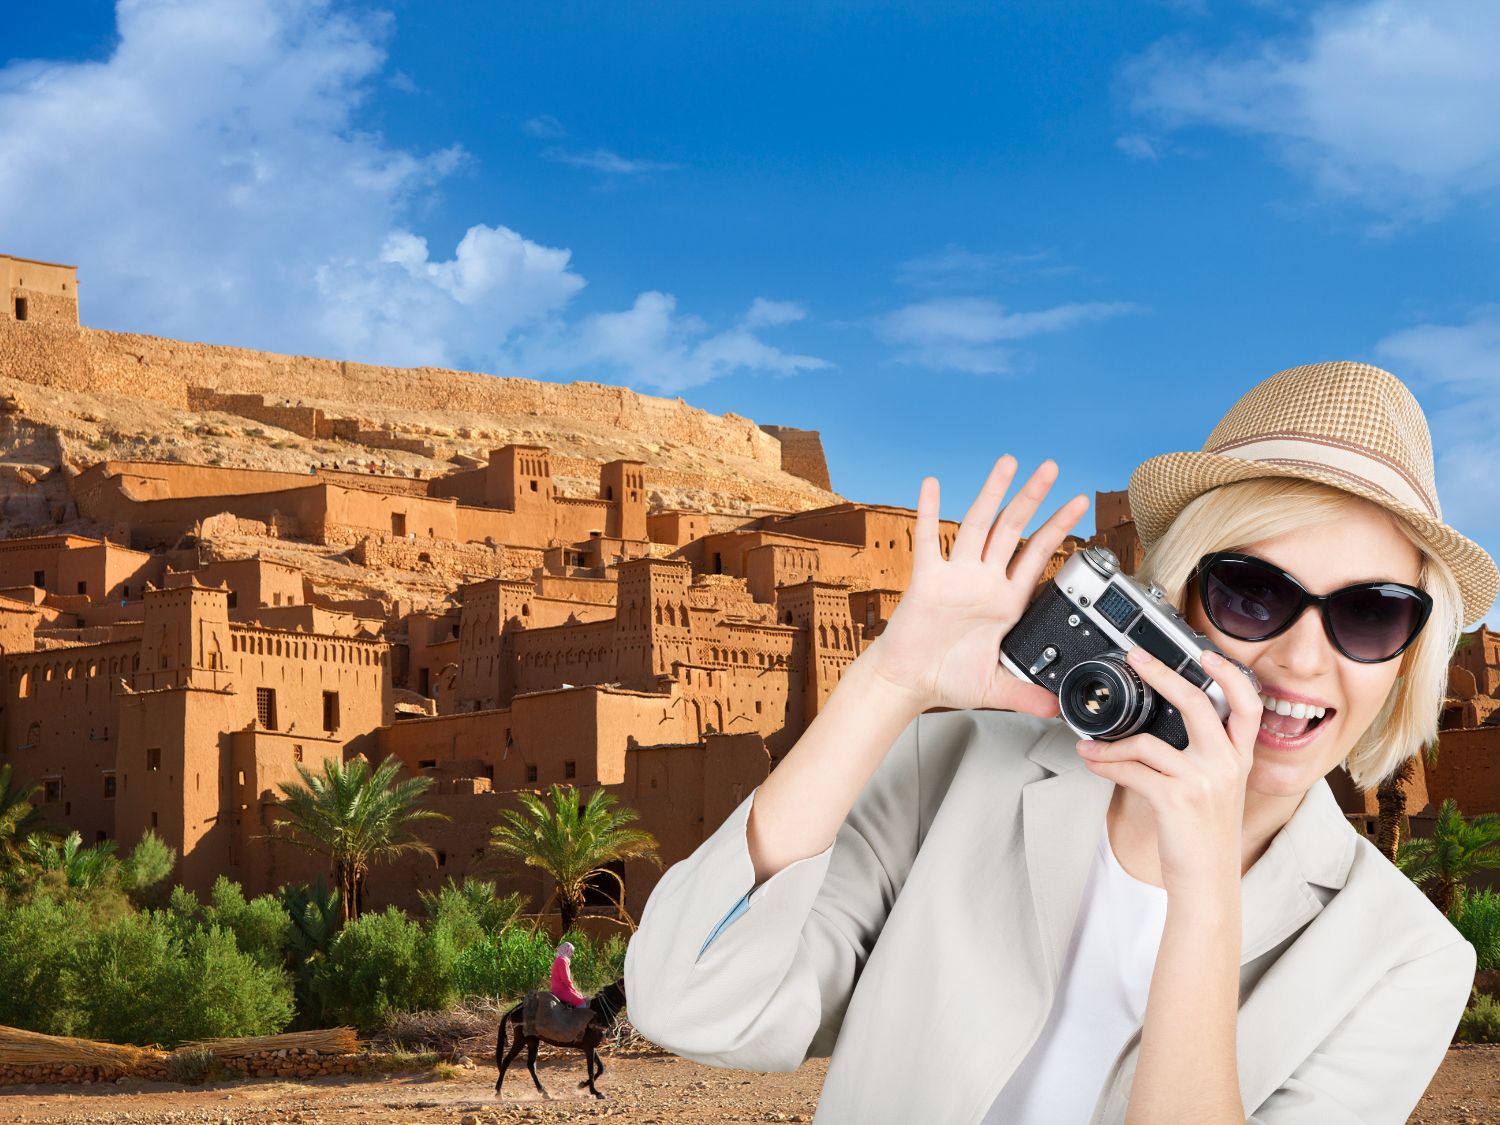 The 6 Best Morocco Tours For Unforgettable Adventures That Are Achievable & Affordable